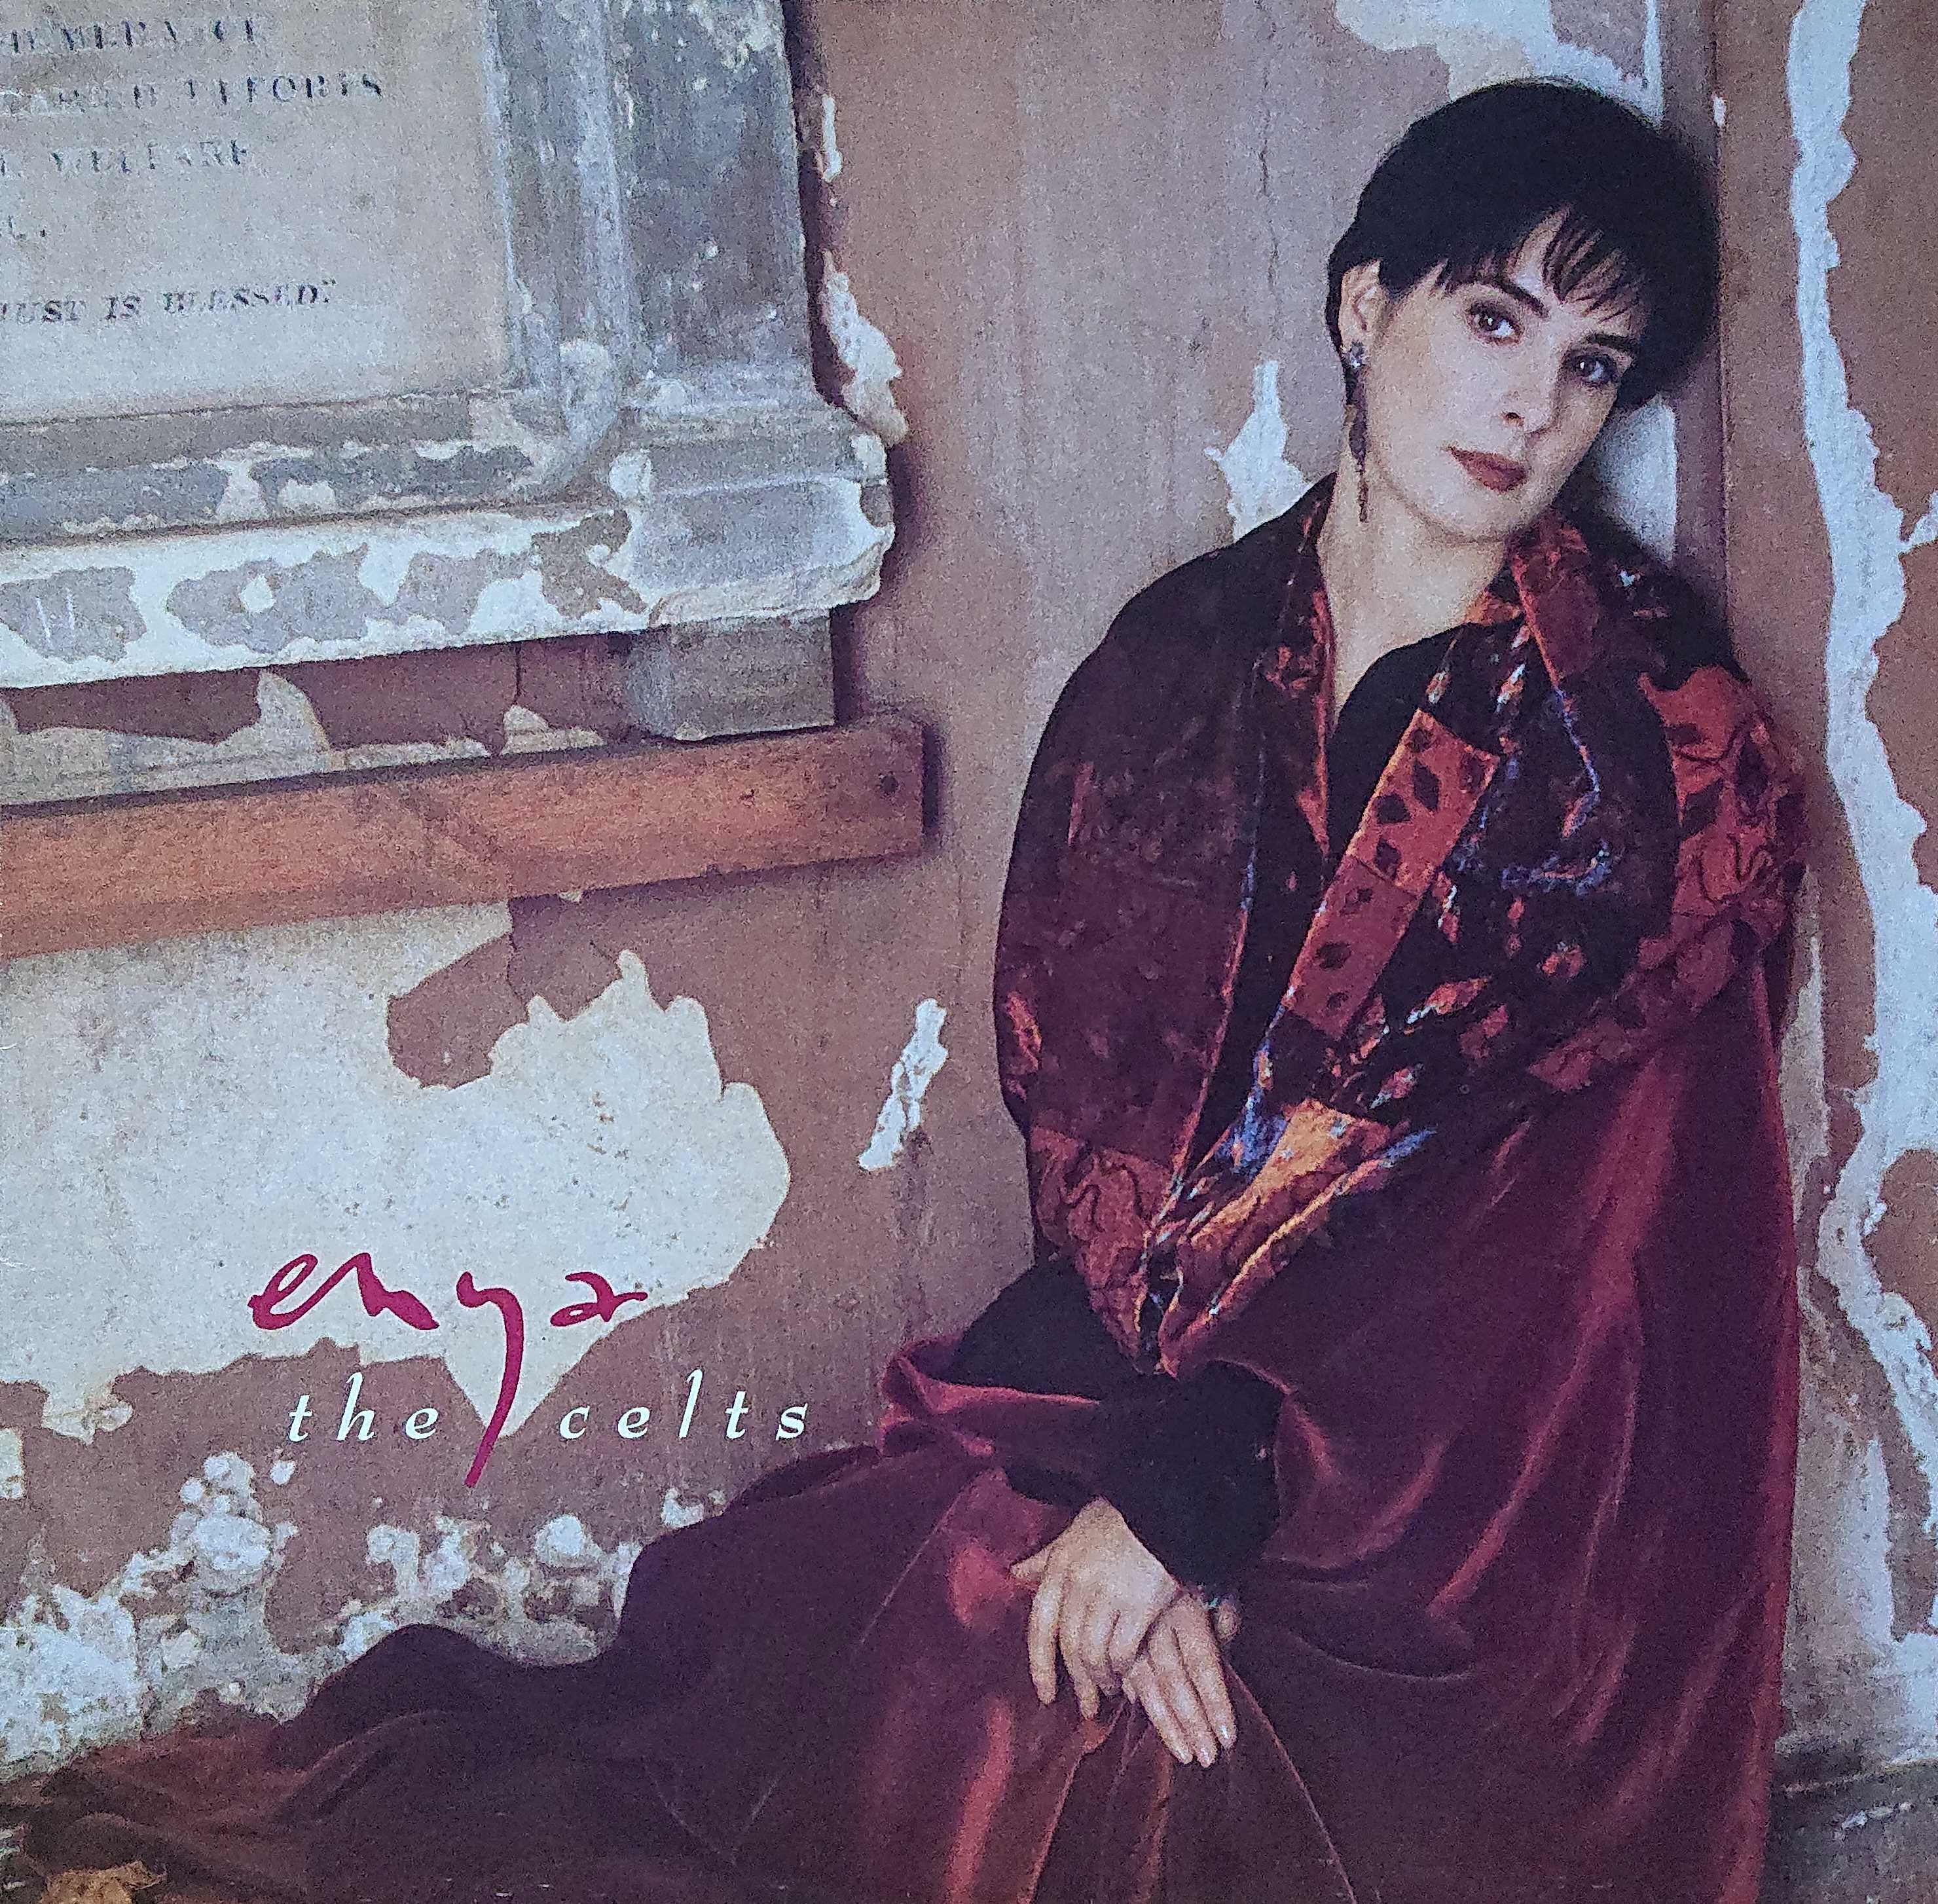 Picture of WX 498-iF The Celts by artist Enya / Roma Ryan from the BBC albums - Records and Tapes library